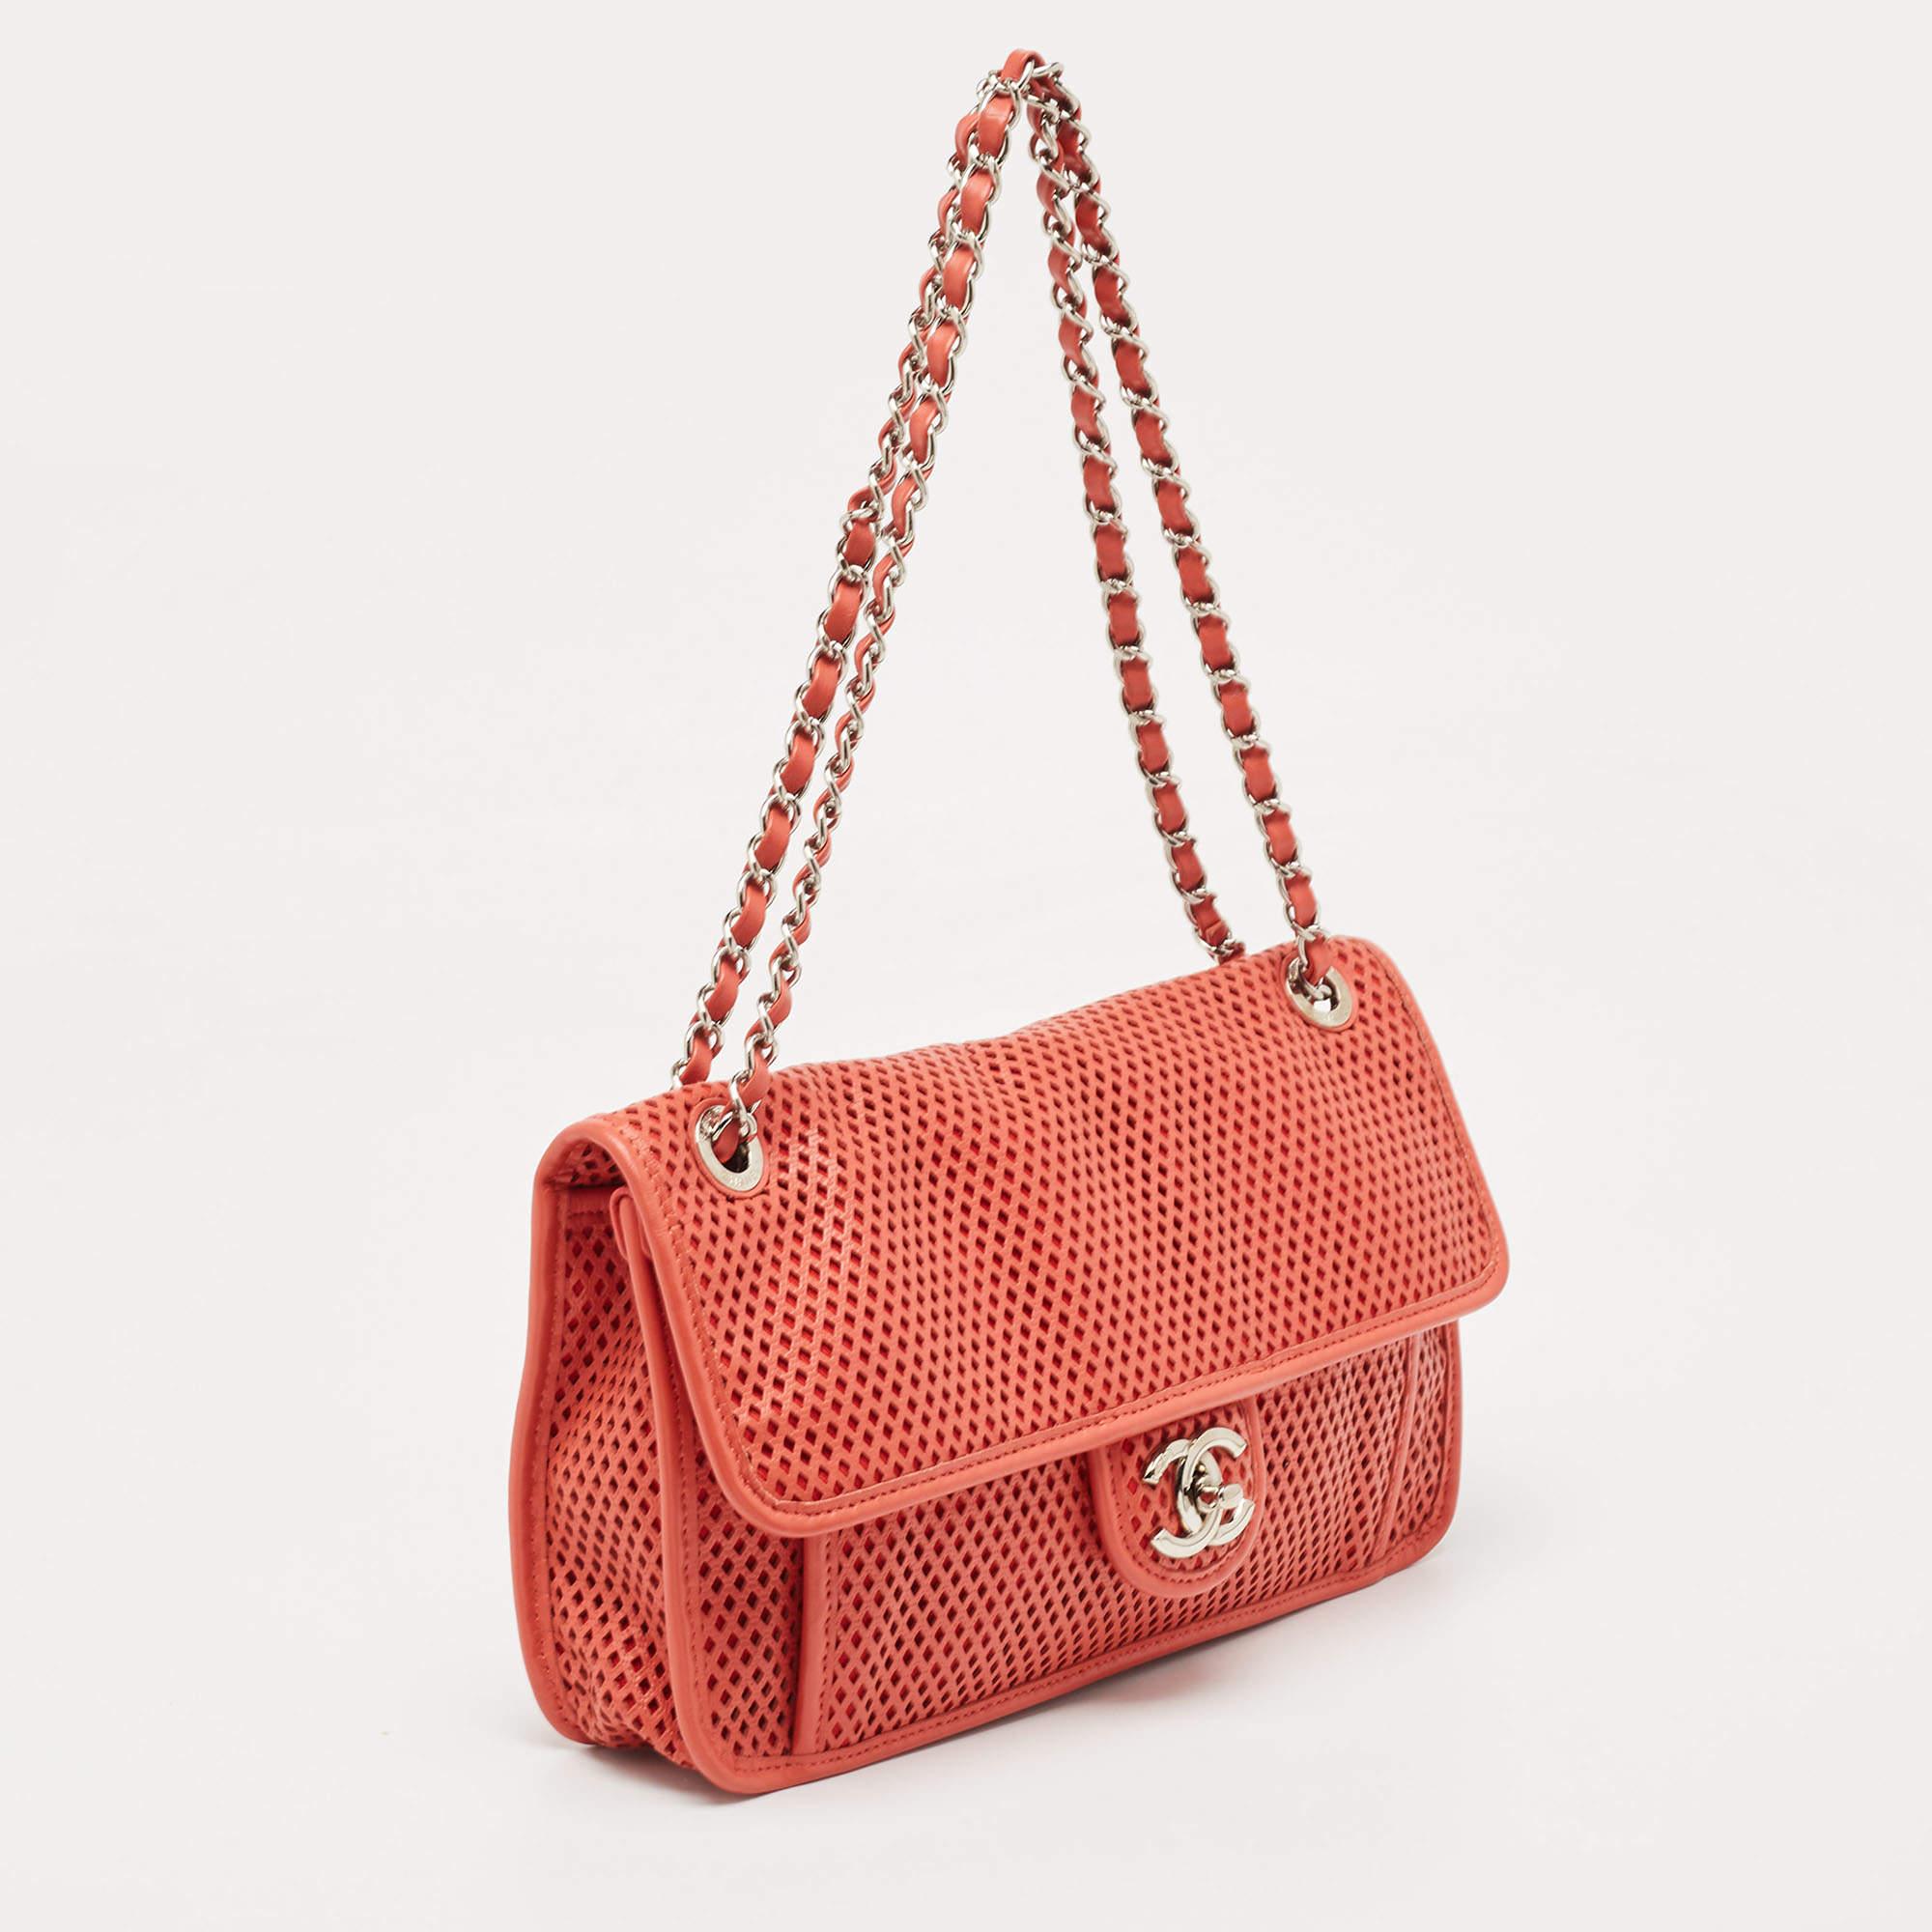 Chanel Red Perforated Leather Up in the Air Flap Bag In Excellent Condition For Sale In Dubai, Al Qouz 2